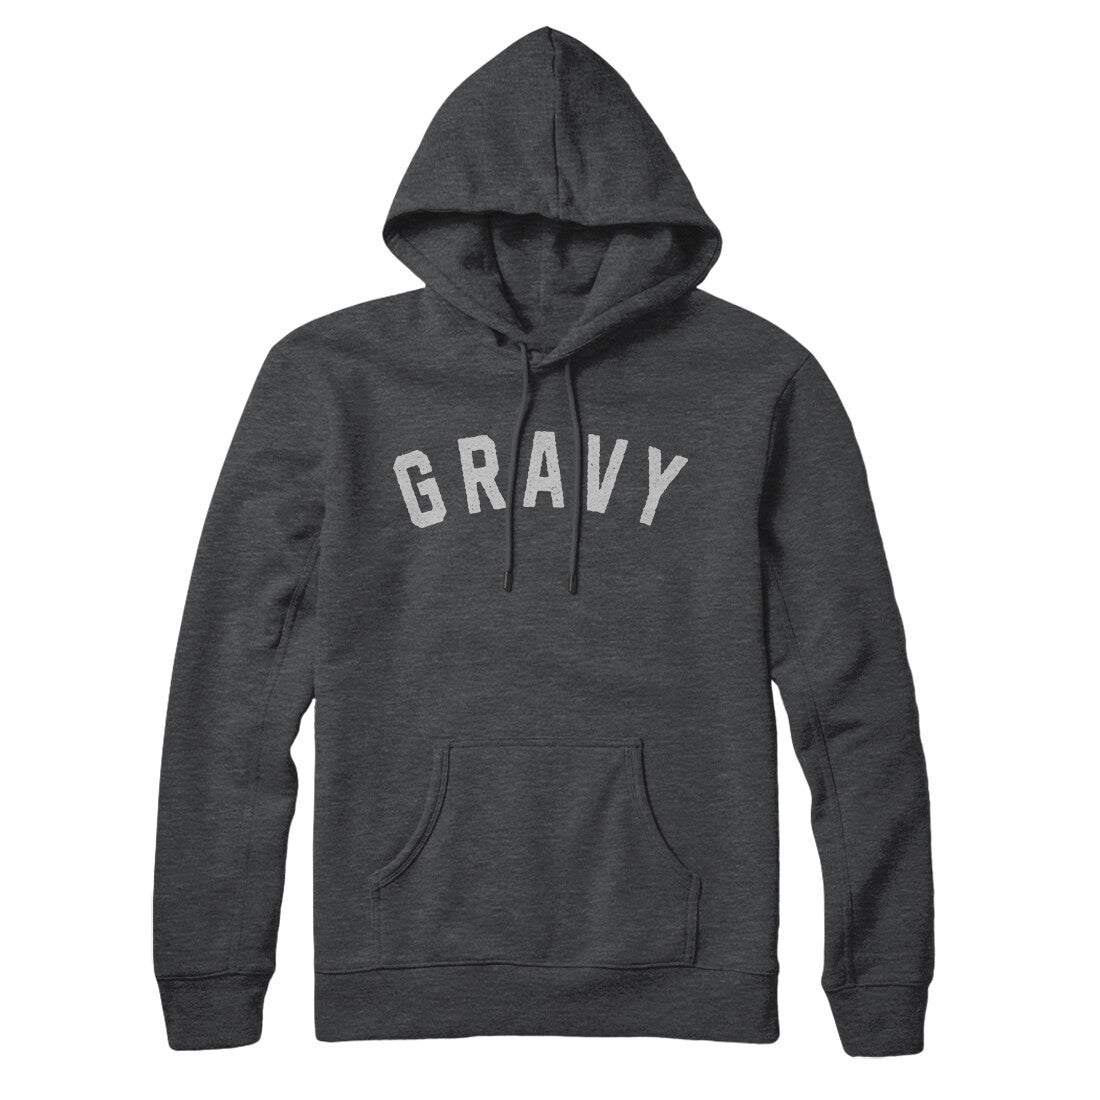 Gravy in Charcoal Heather Color